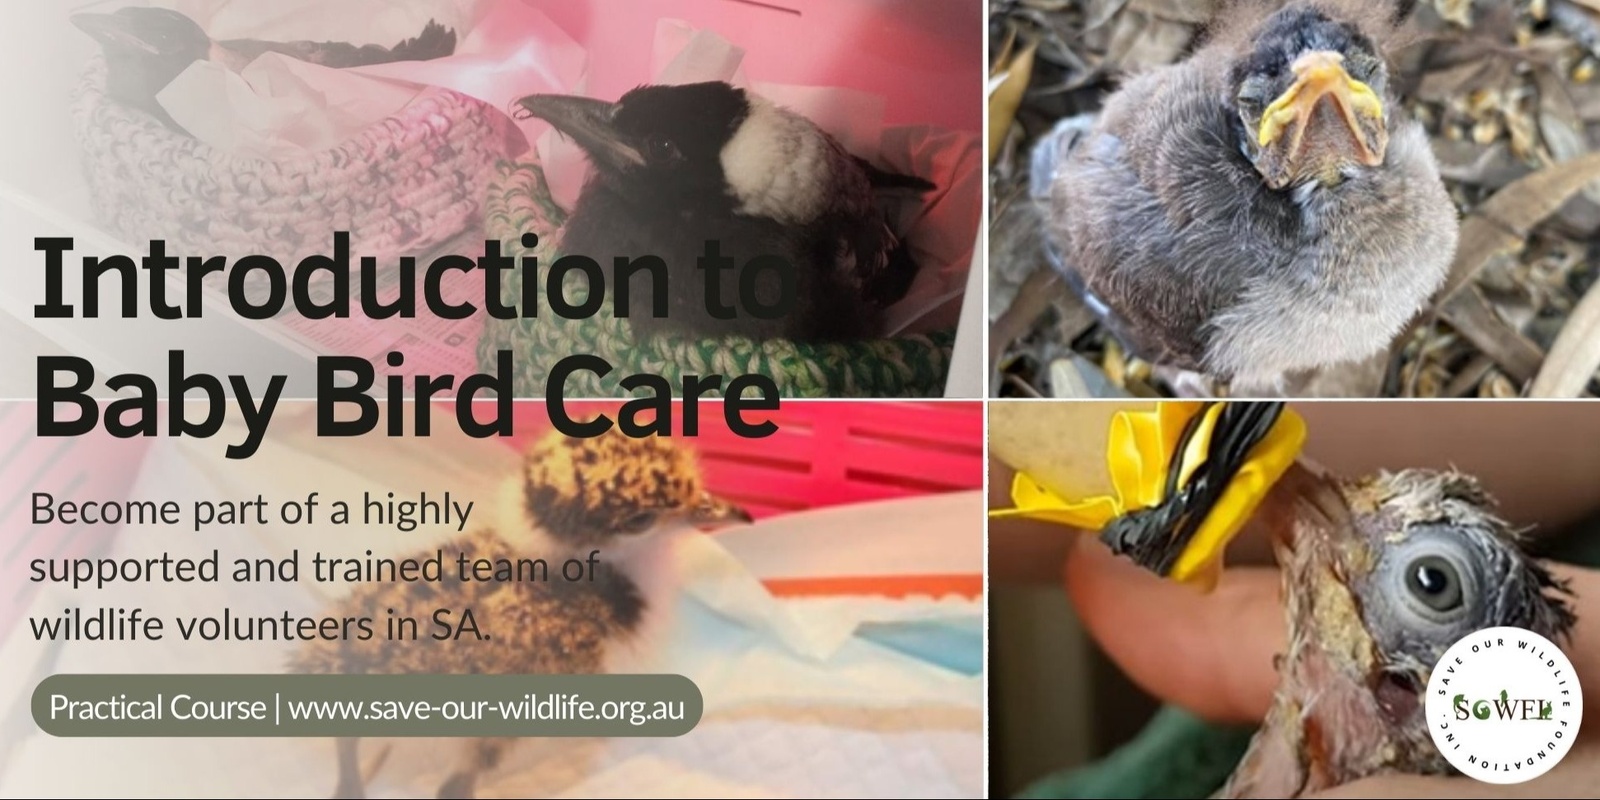 Banner image for Introduction to Baby Bird Care